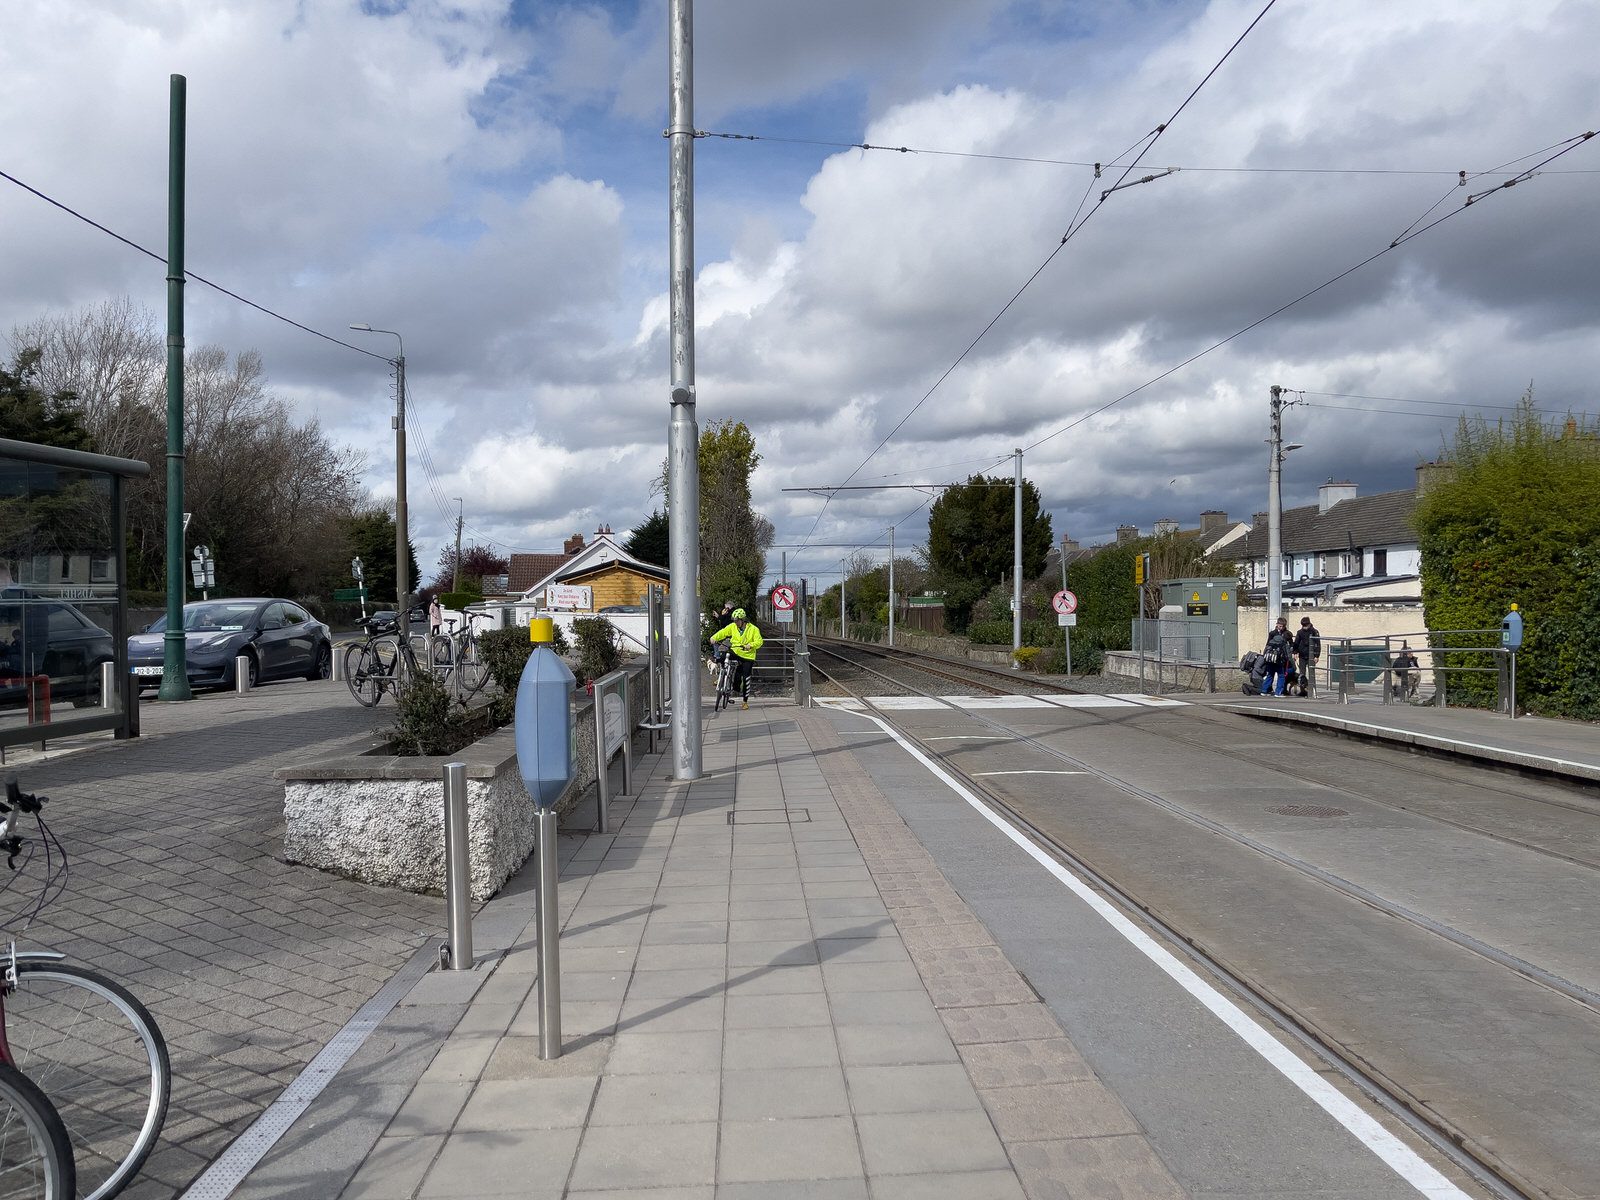 THE LUAS TRAM STOP AT WINDY ARBOUR AND THE IMMEDIATE AREA 031